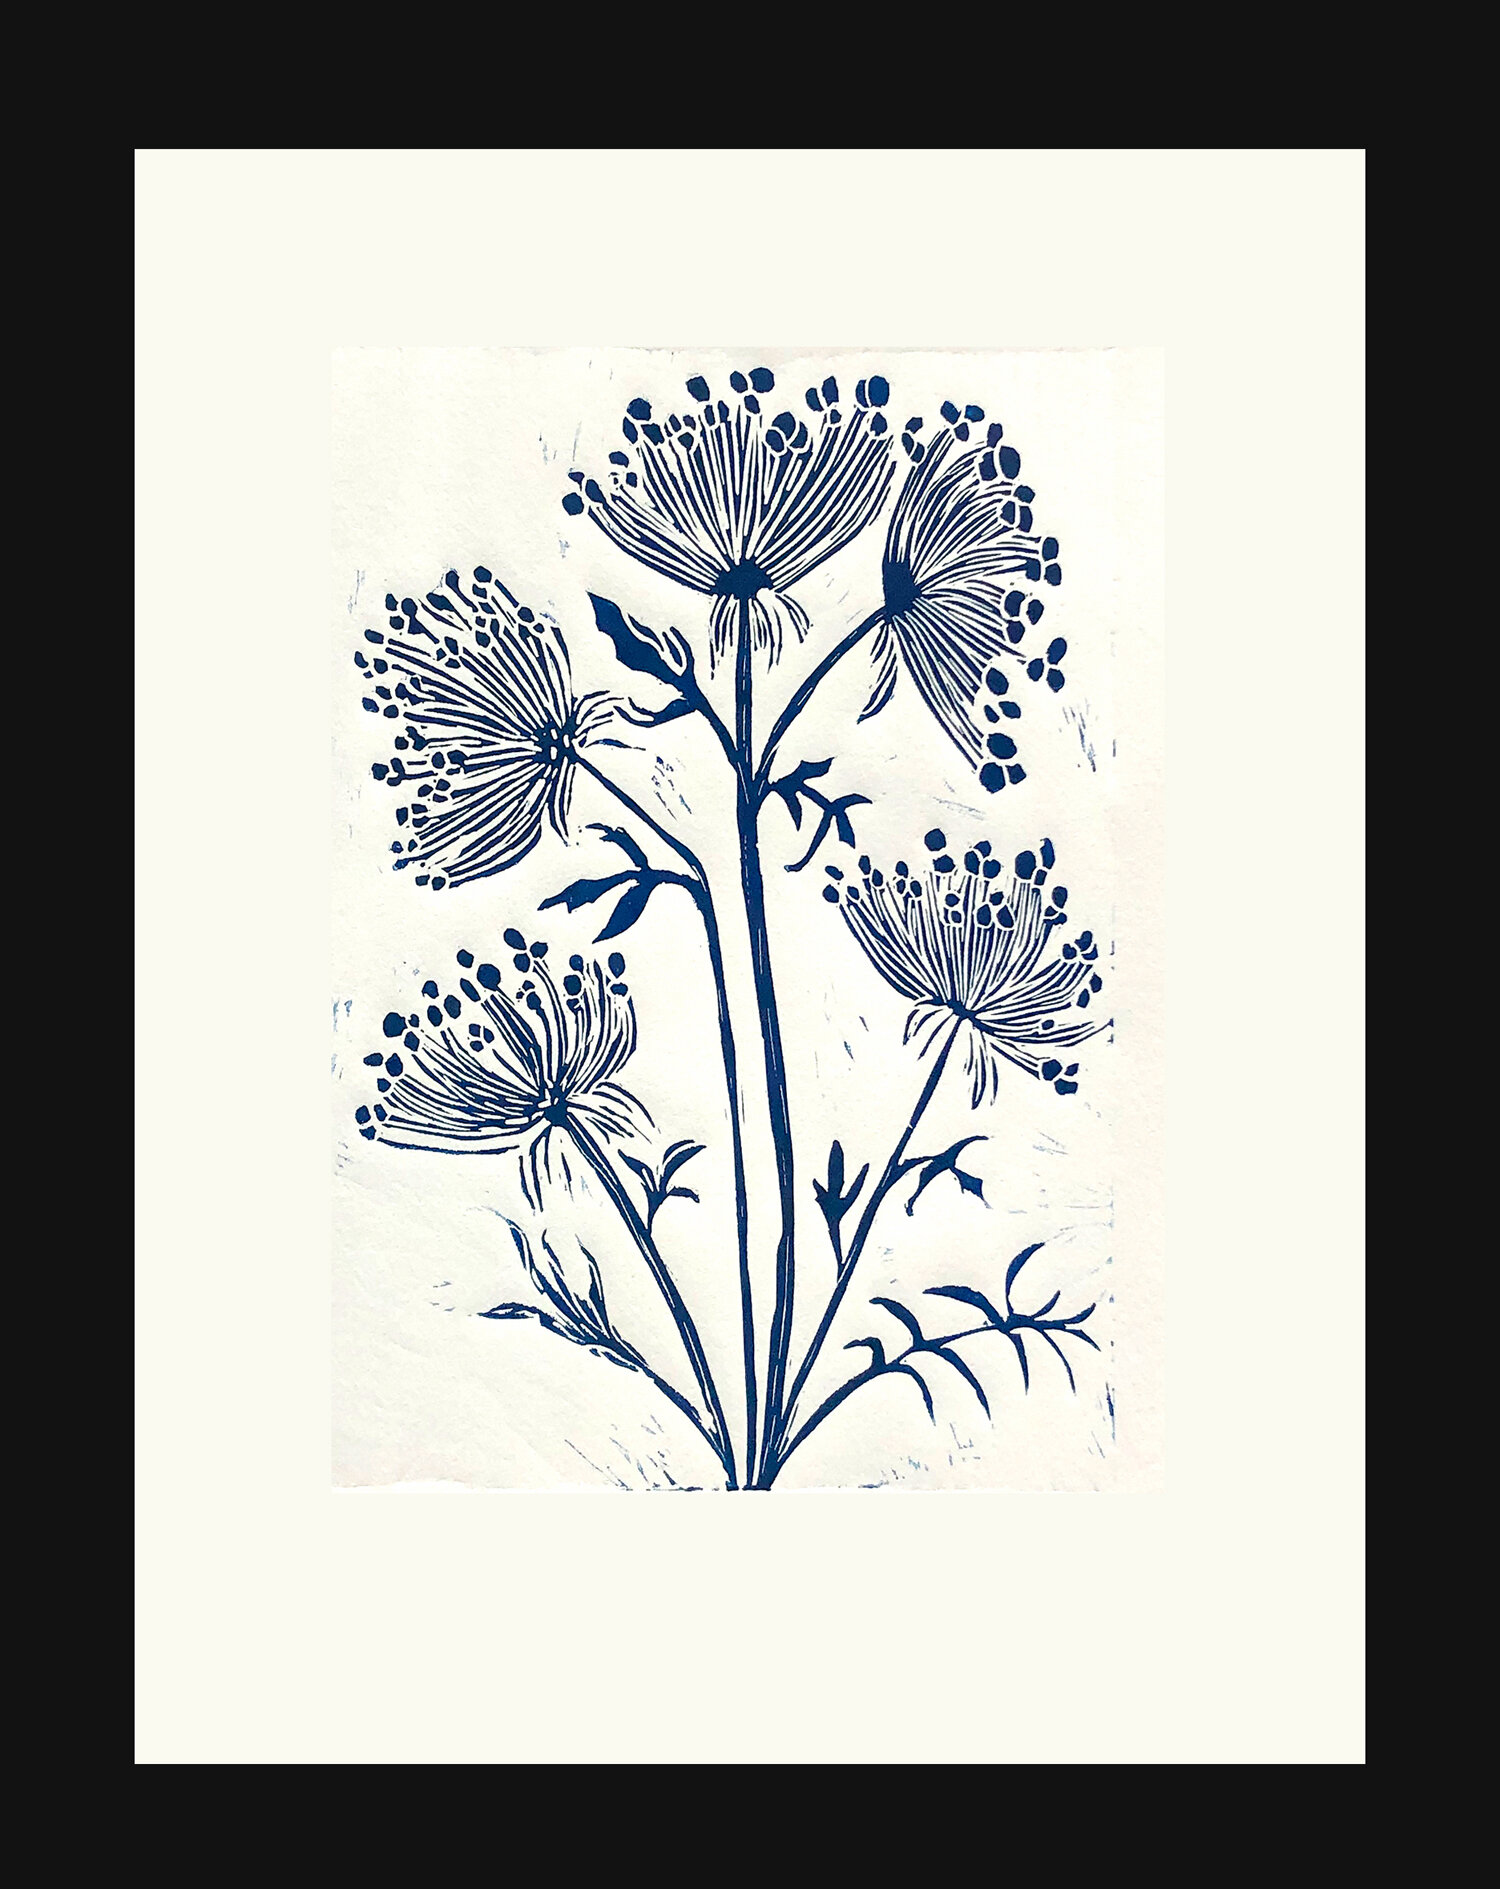    Bishop’s Lace   Also referred to as Wild Carrot, Queen Anne’s Lace or Bird’s Nest. Bishop’s Lace represents sanctuary. Linocut, Edition of 5, Framed, 19 x15   $135  